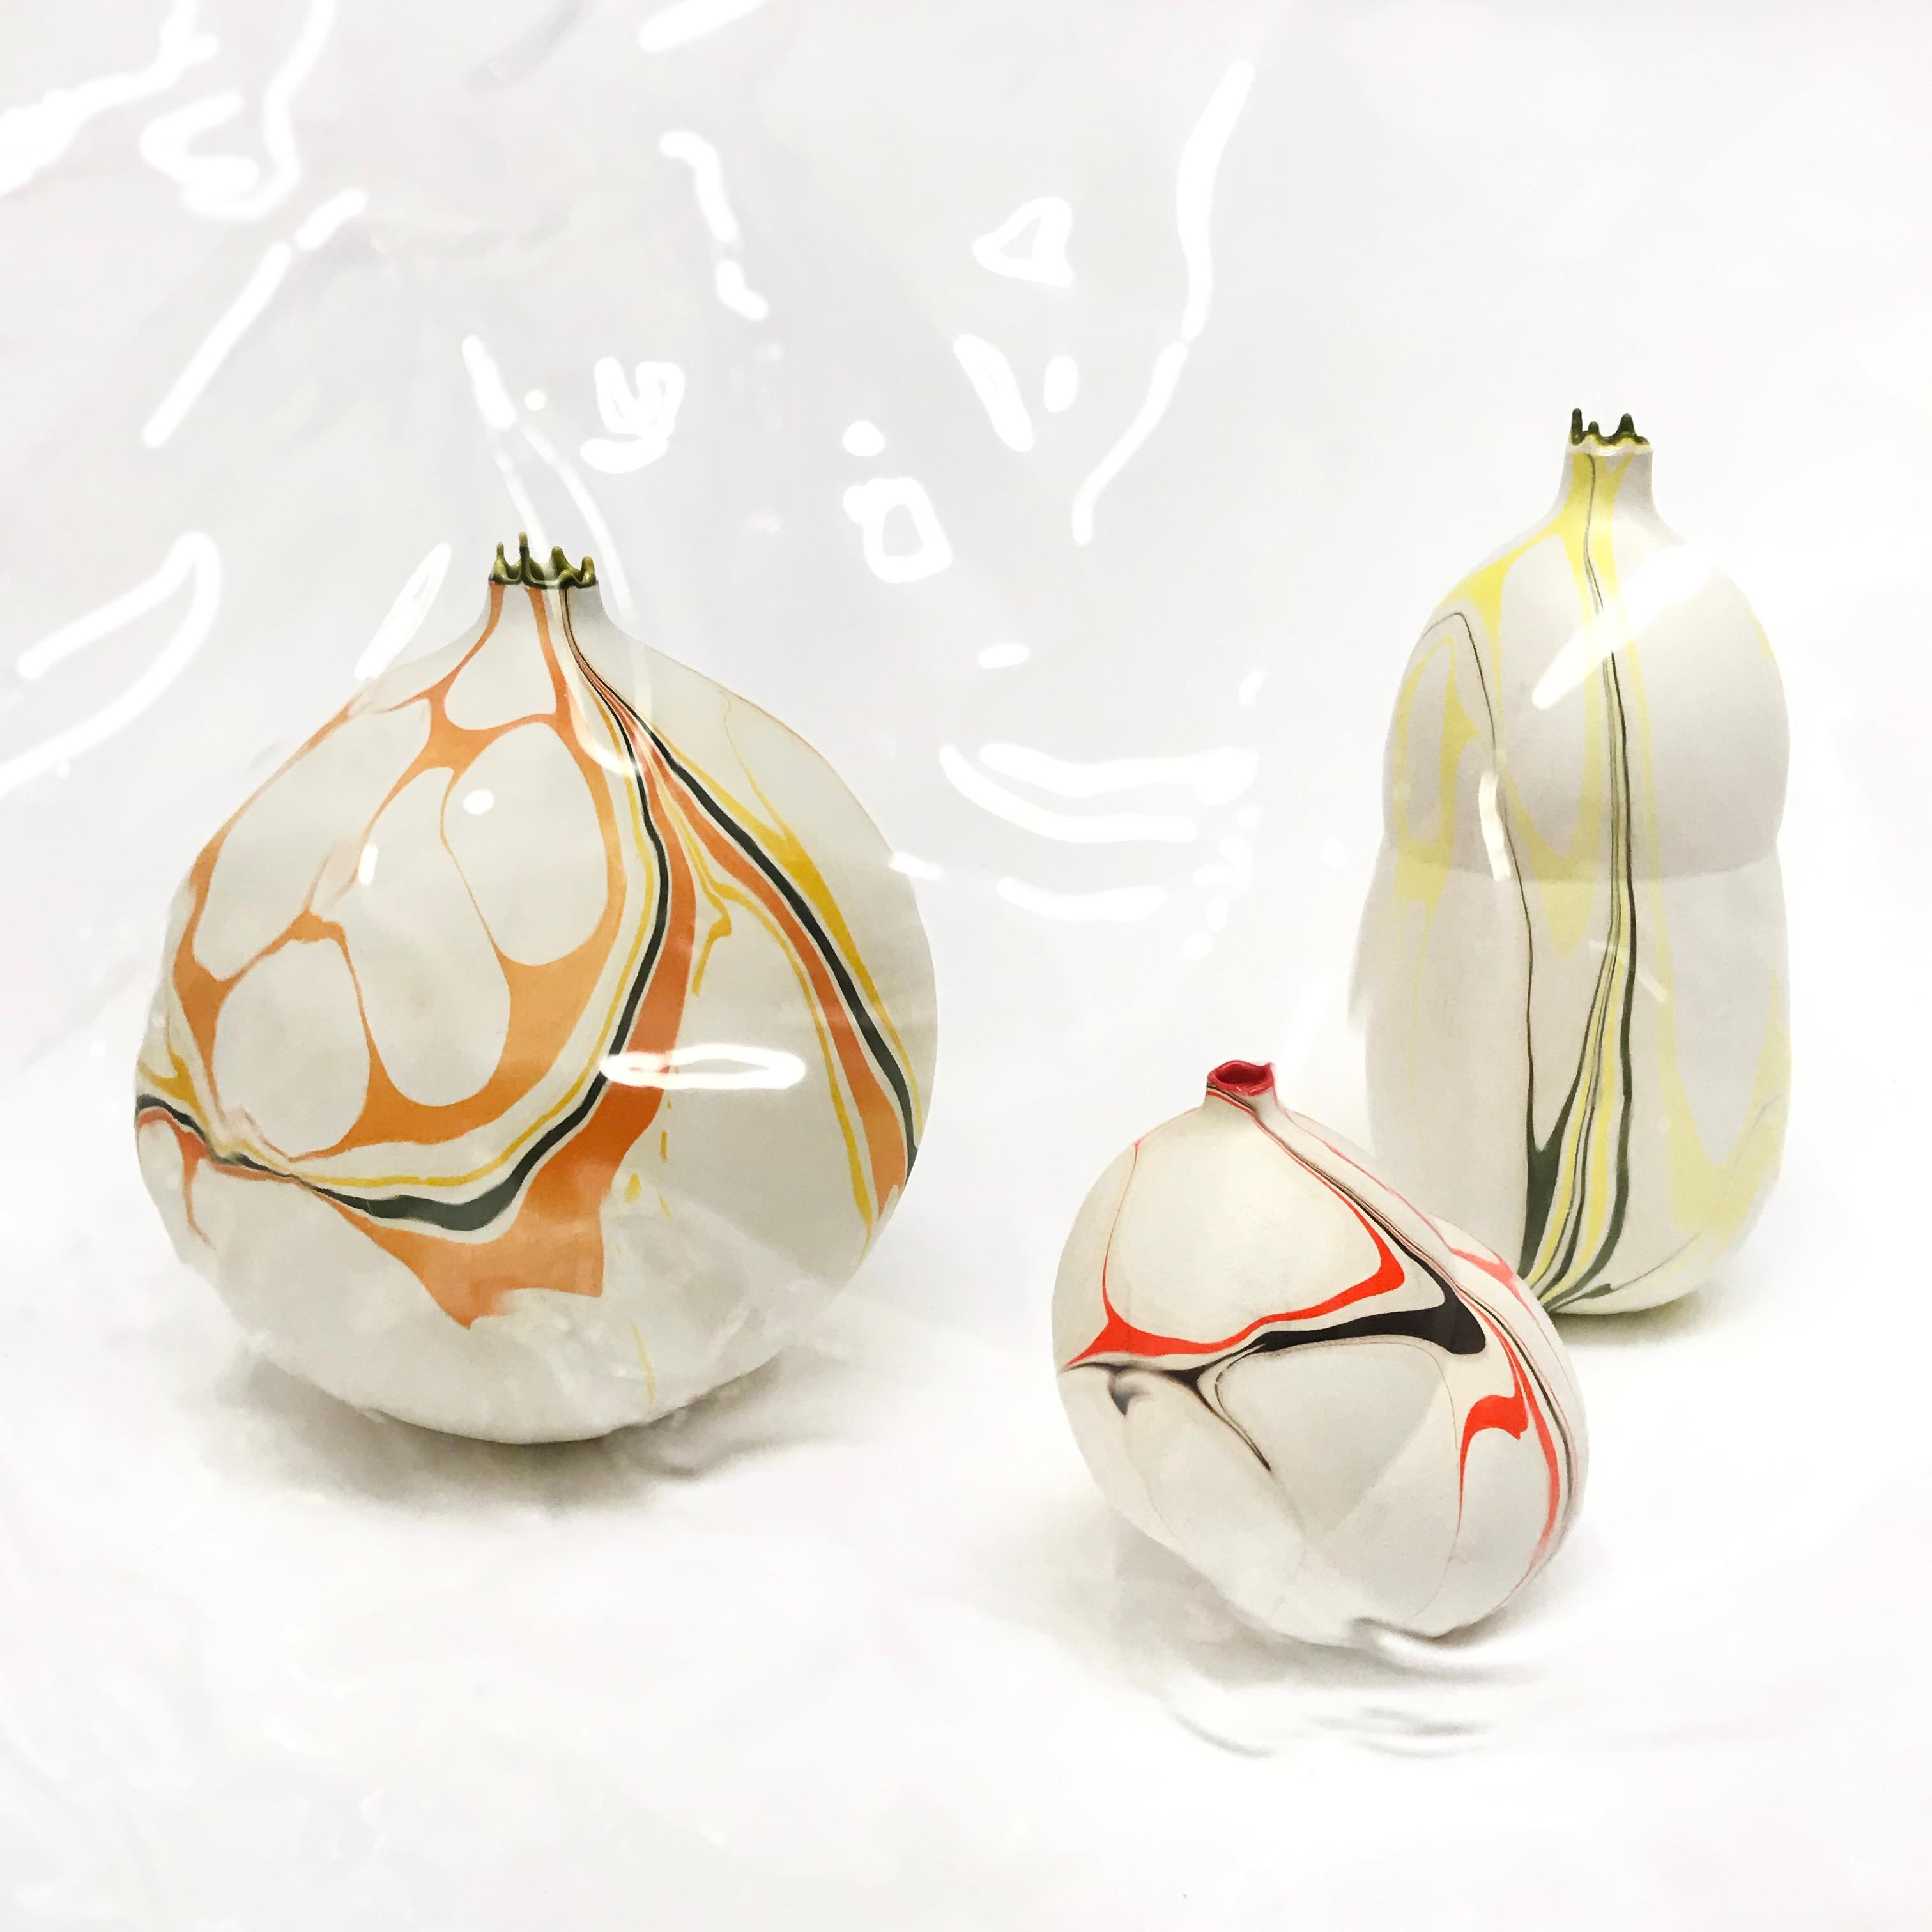 Plaster Contemporary White and Yellow Marbled Tethys Vase by Elyse Graham For Sale